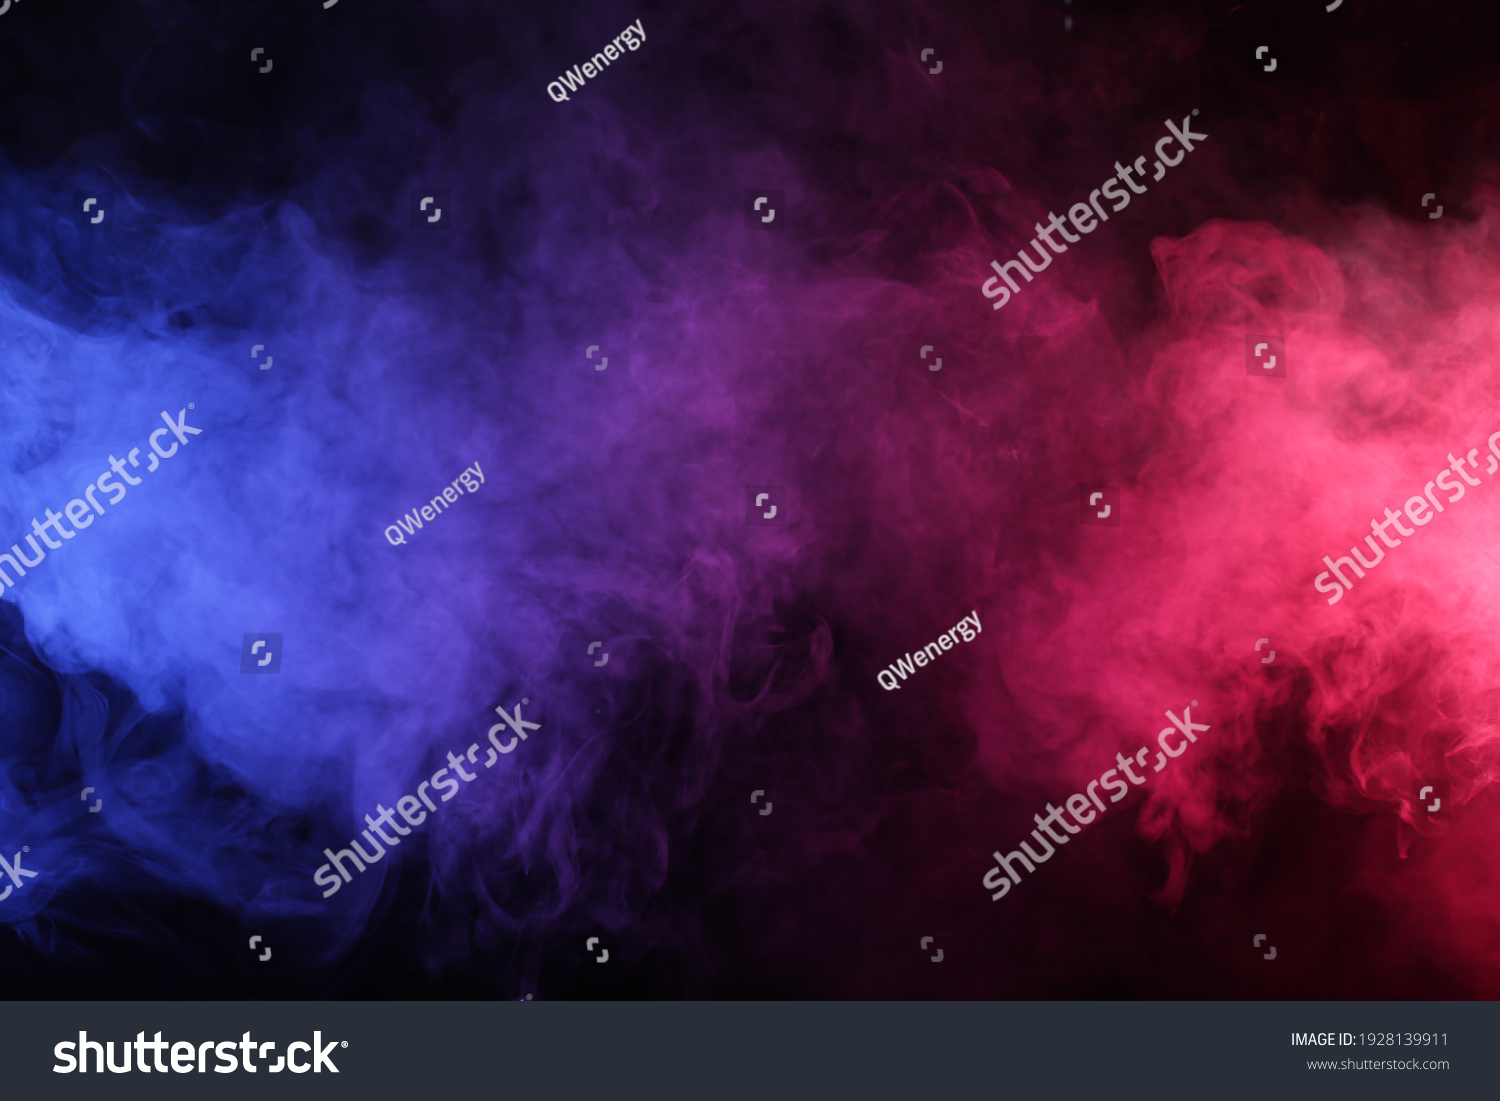 Artificial smoke in red-blue light on black background in darkness #1928139911